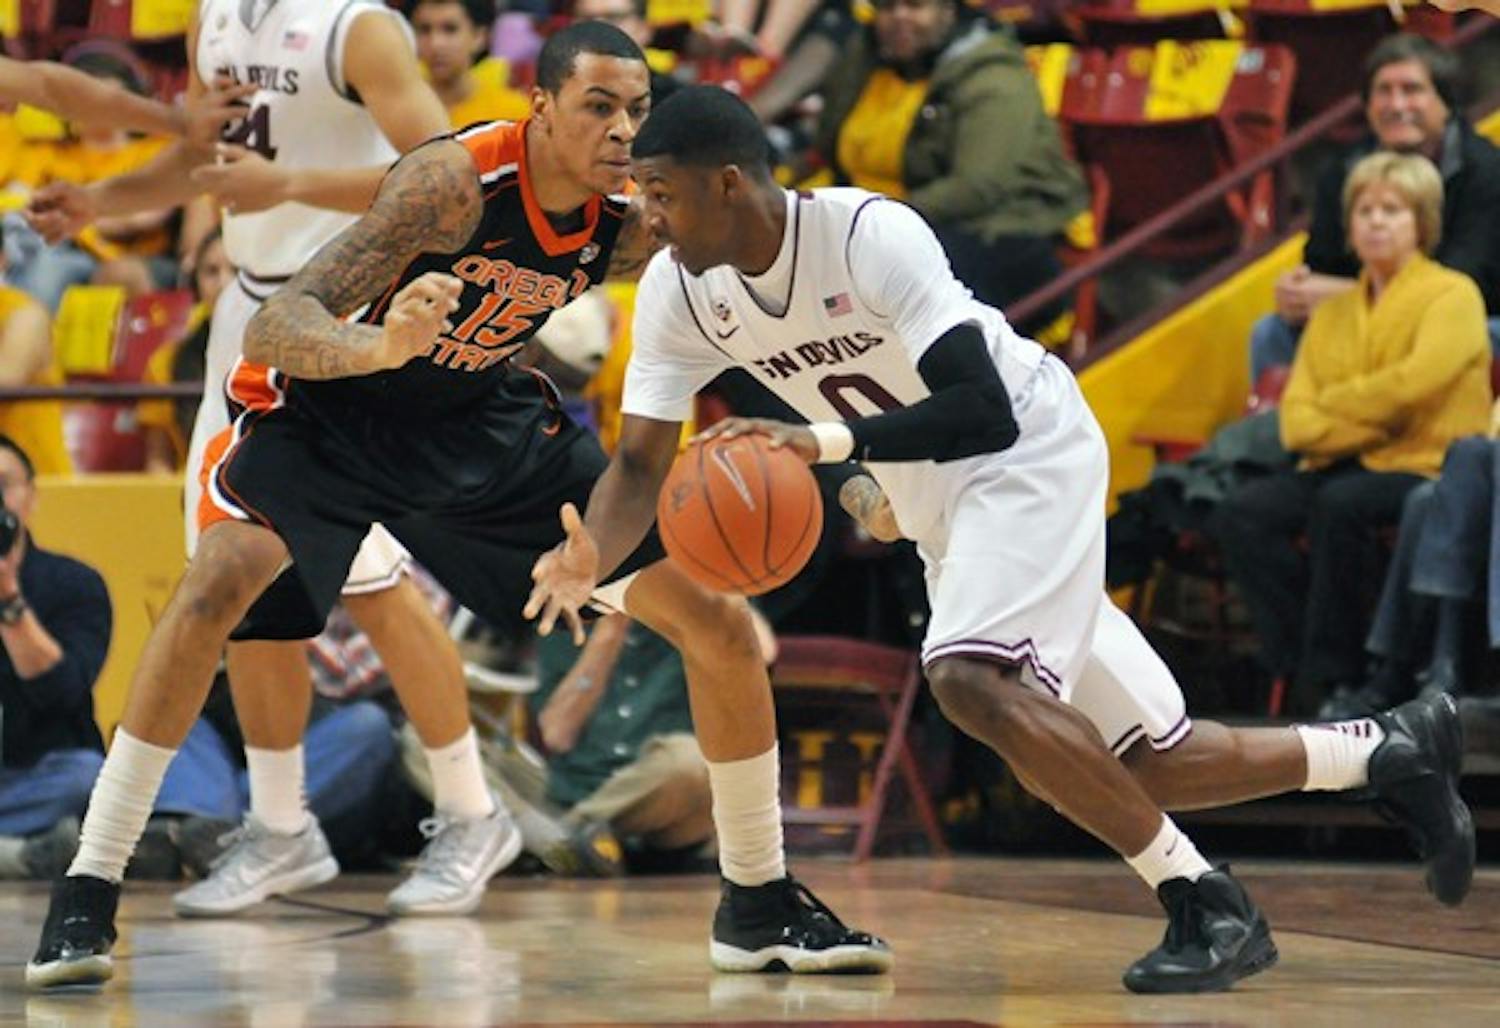 Carrick Felix drives against Oregon State on Jan. 14. Felix led the team in scoring as the Sun Devils snapped their three-game losing streak Saturday against Washington State. (Photo by Aaron Lavinsky)